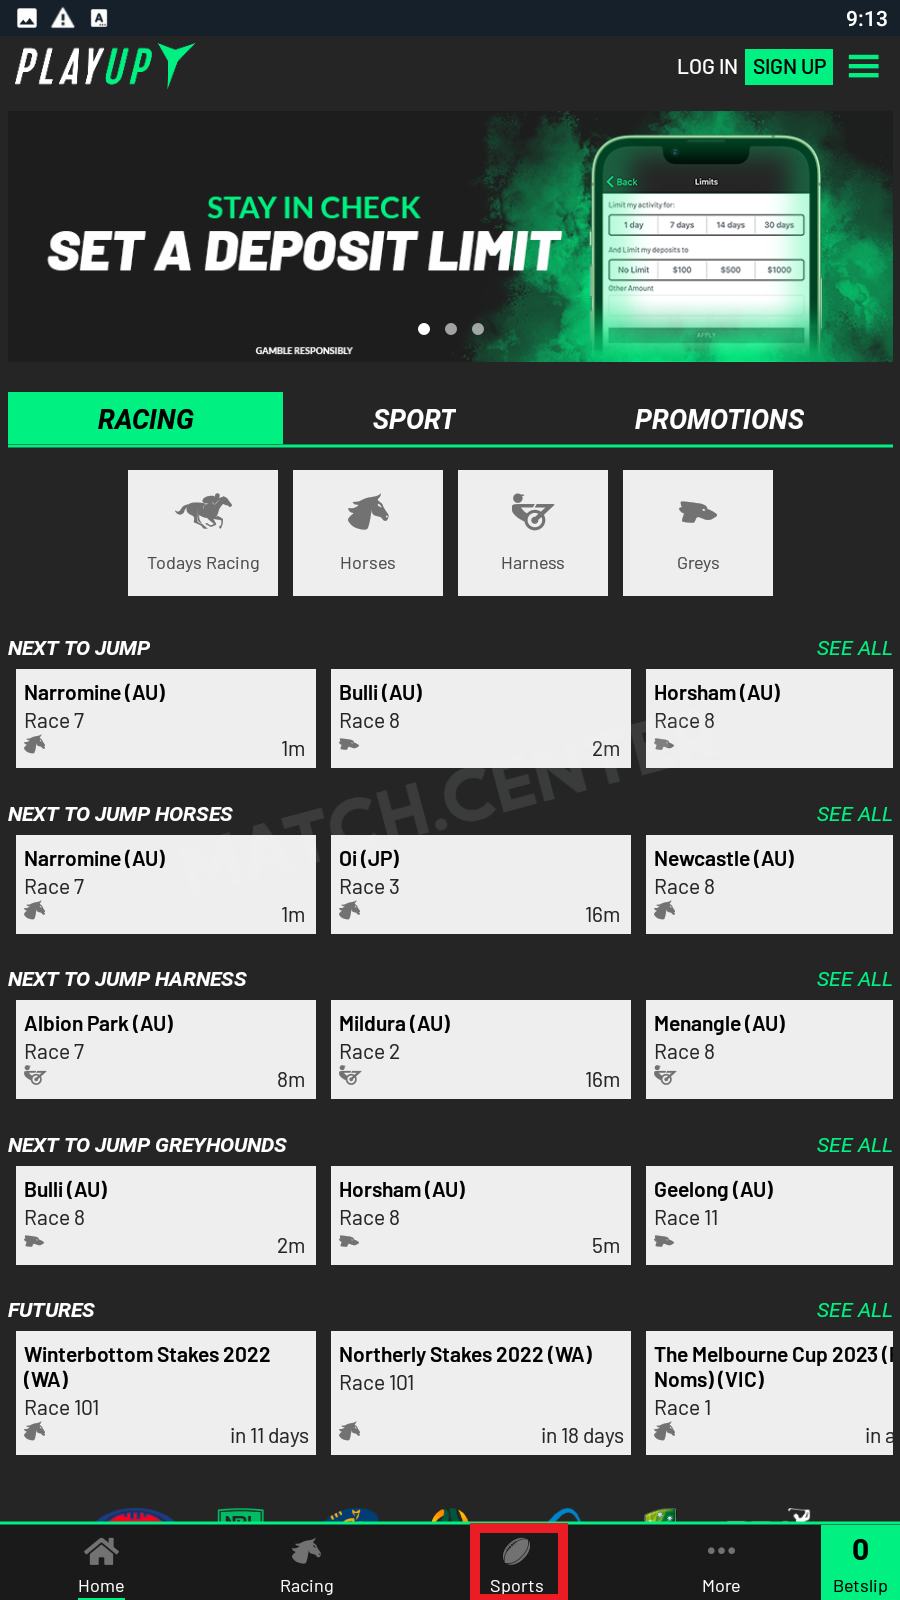 “Sports” section in the PlayUp betting app